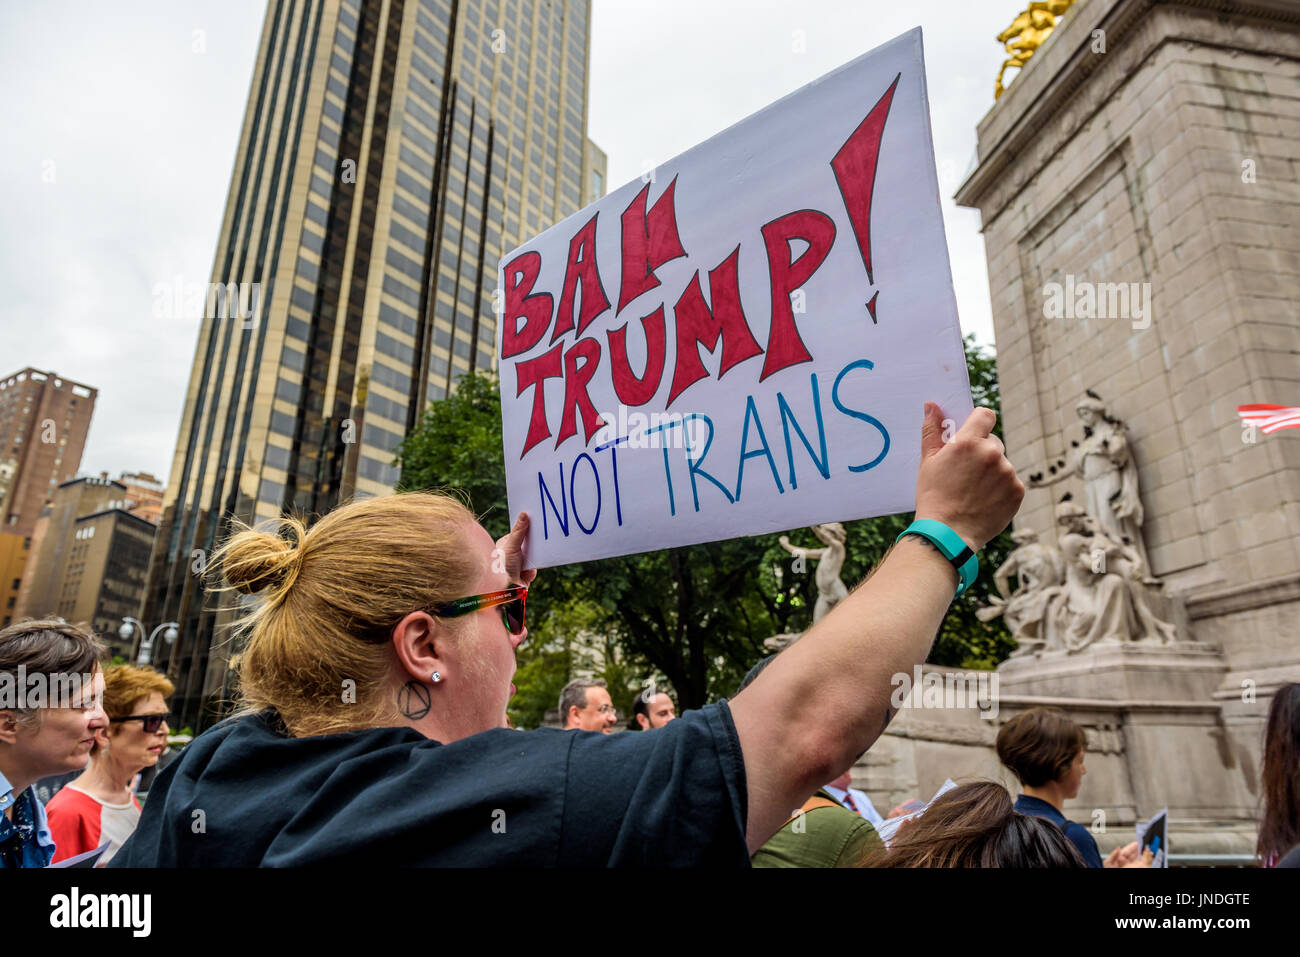 New York, United States. 29th July, 2017. A group of New Yorkers gathered at Columbus Circle across the Trump International Hotel and Tower New York in Central Park to raise their voices in protest against discrimination towards the LGBT community, in the aftermath of the Trump/Pence regime decision to ban transgender people from serving in the U.S. military. Credit: Erik McGregor/Pacific Press/Alamy Live News Stock Photo